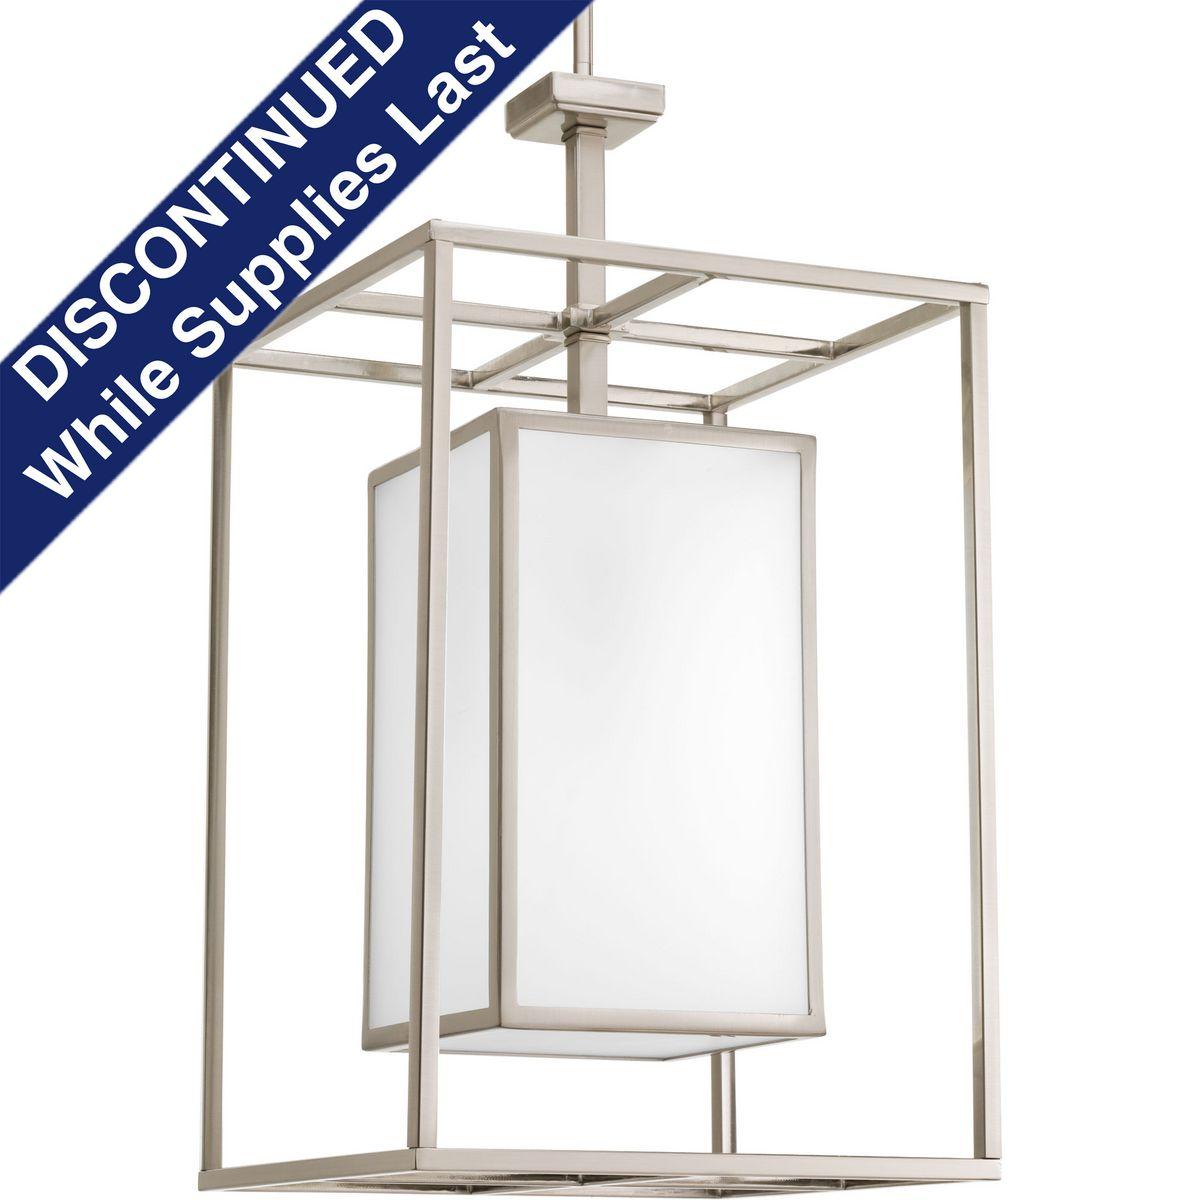 Hubbell P3921-09 The perfect intersection of rectilinear form and contemporary details. The one-light foyer fixture's architectural iron framework is finished with white etched glass.  ; Rectilinear form. ; One-light foyer fixture with architectural iron framework. ; Whit